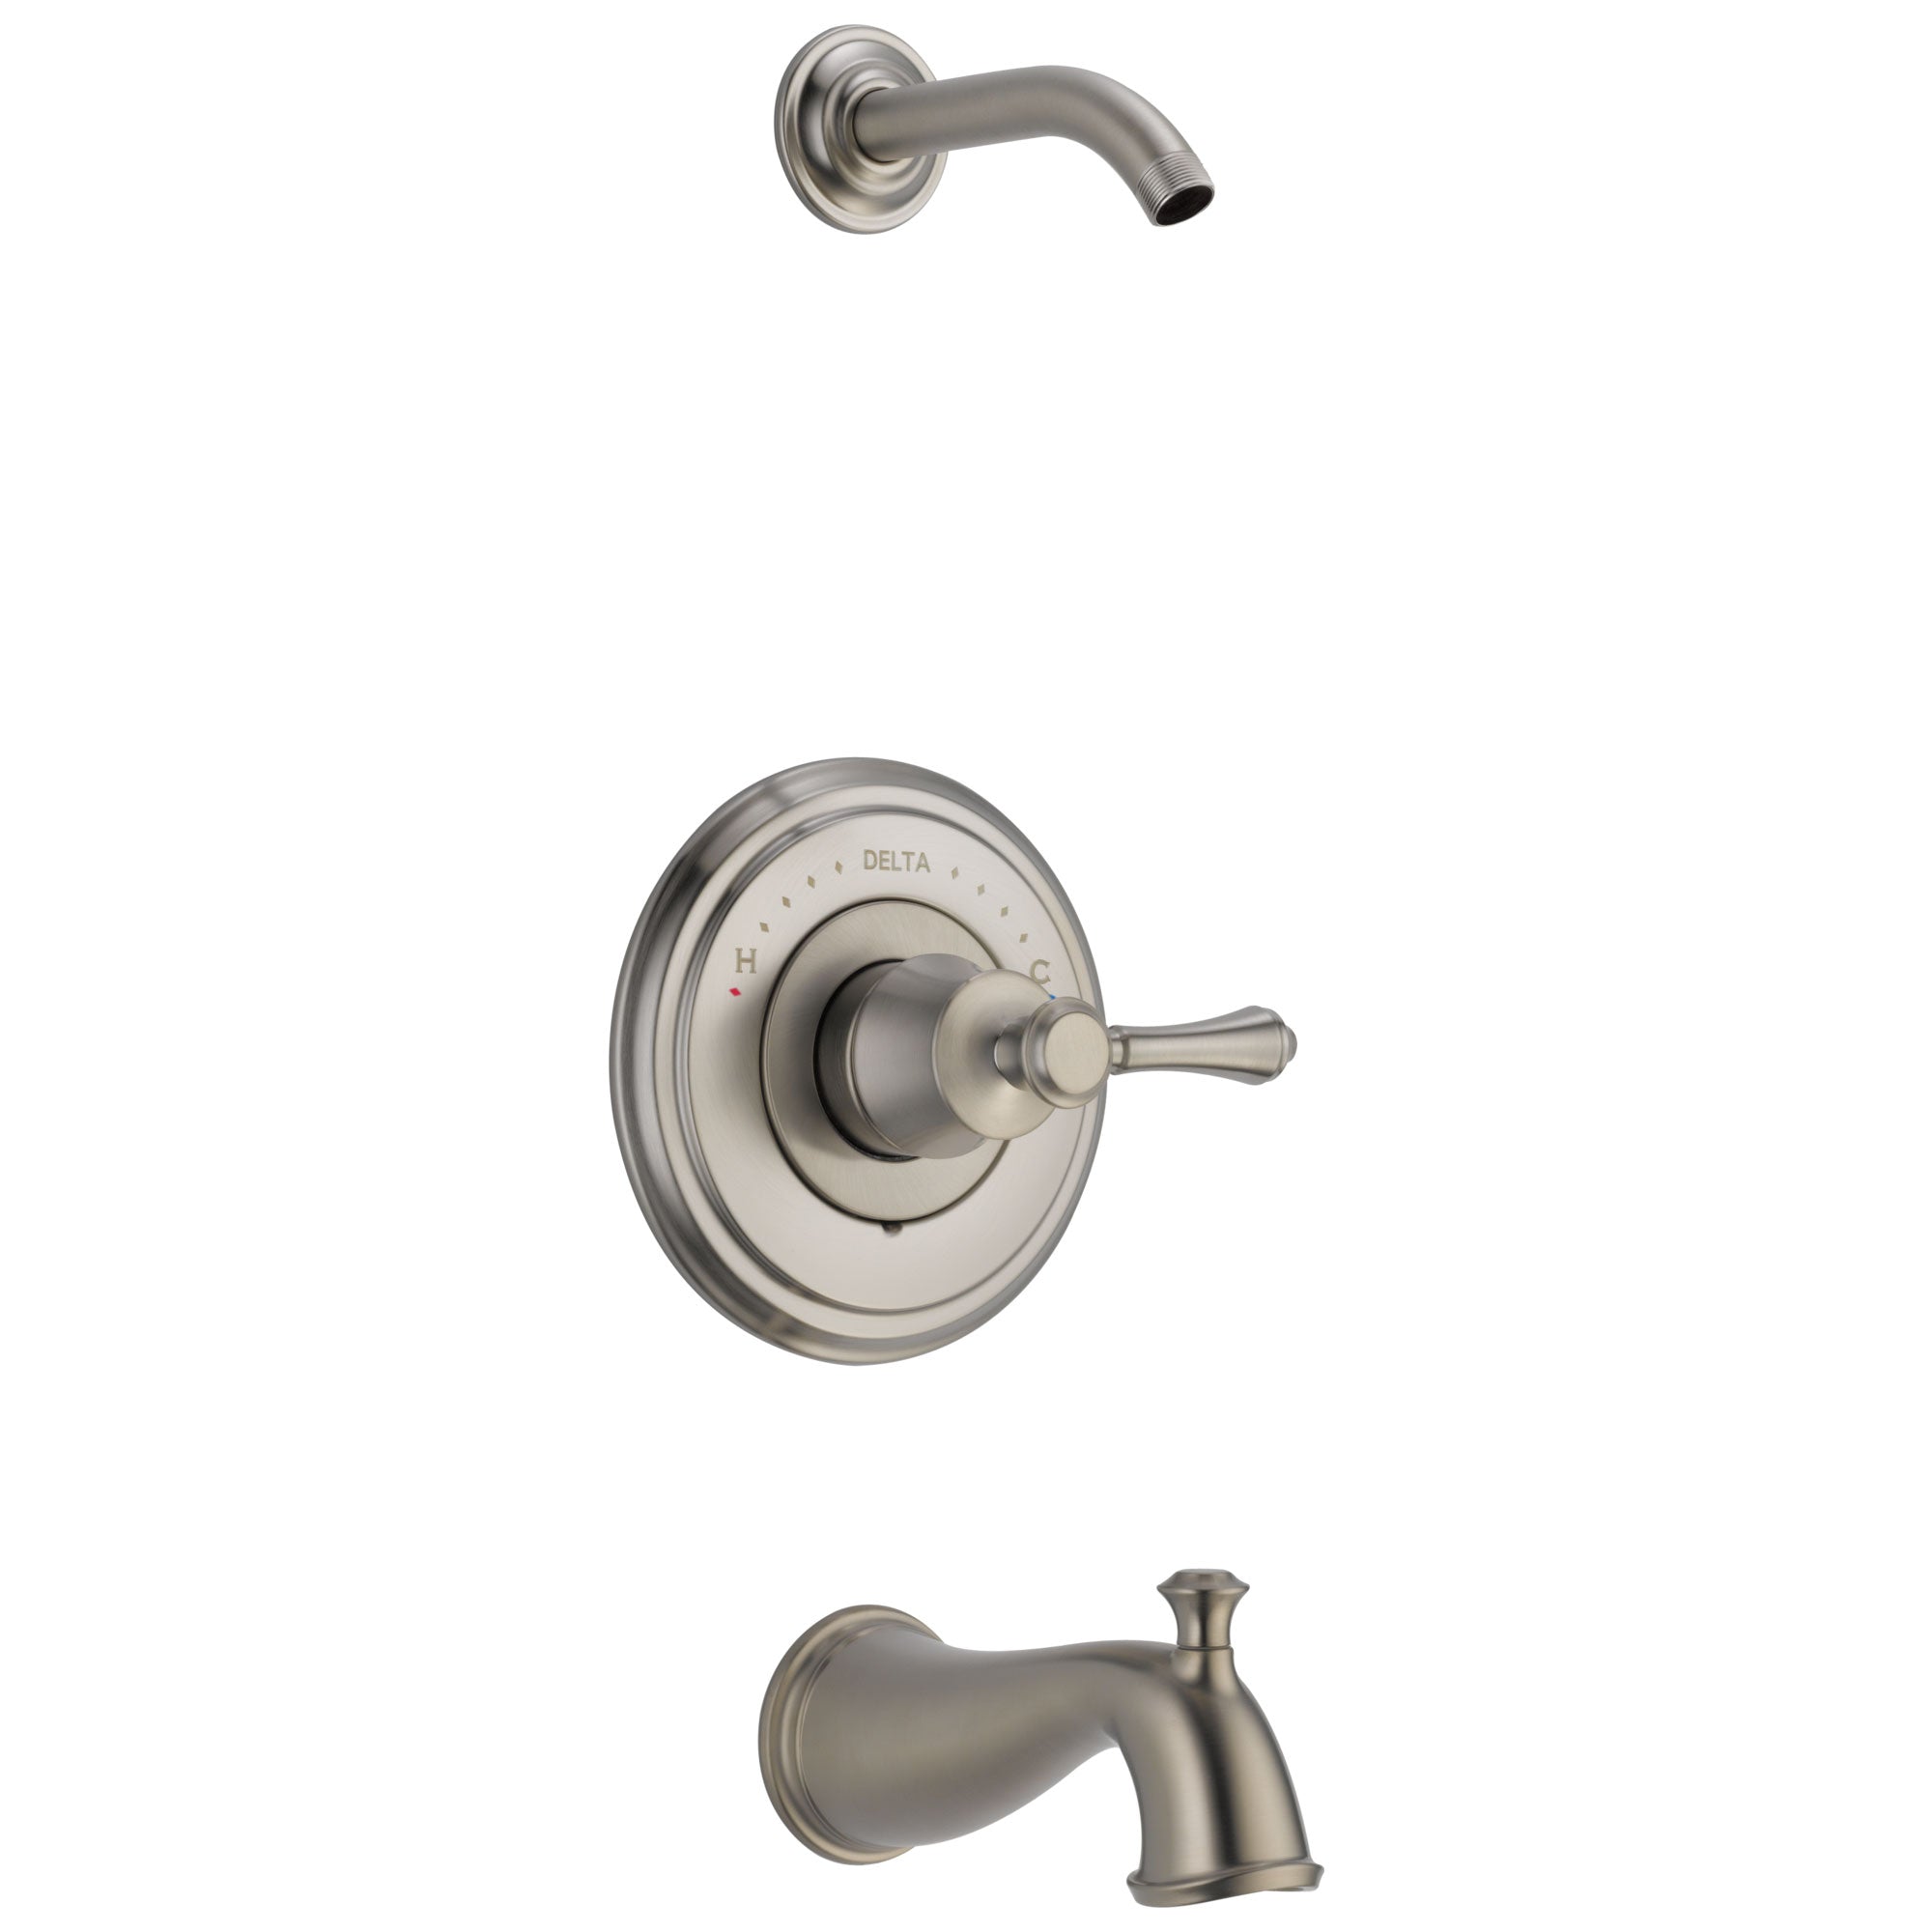 Delta Cassidy Collection Stainless Steel Finish Tub and Shower Combination - Less Showerhead INCLUDES Single Lever Handle and Rough-in Valve with Stops D1818V